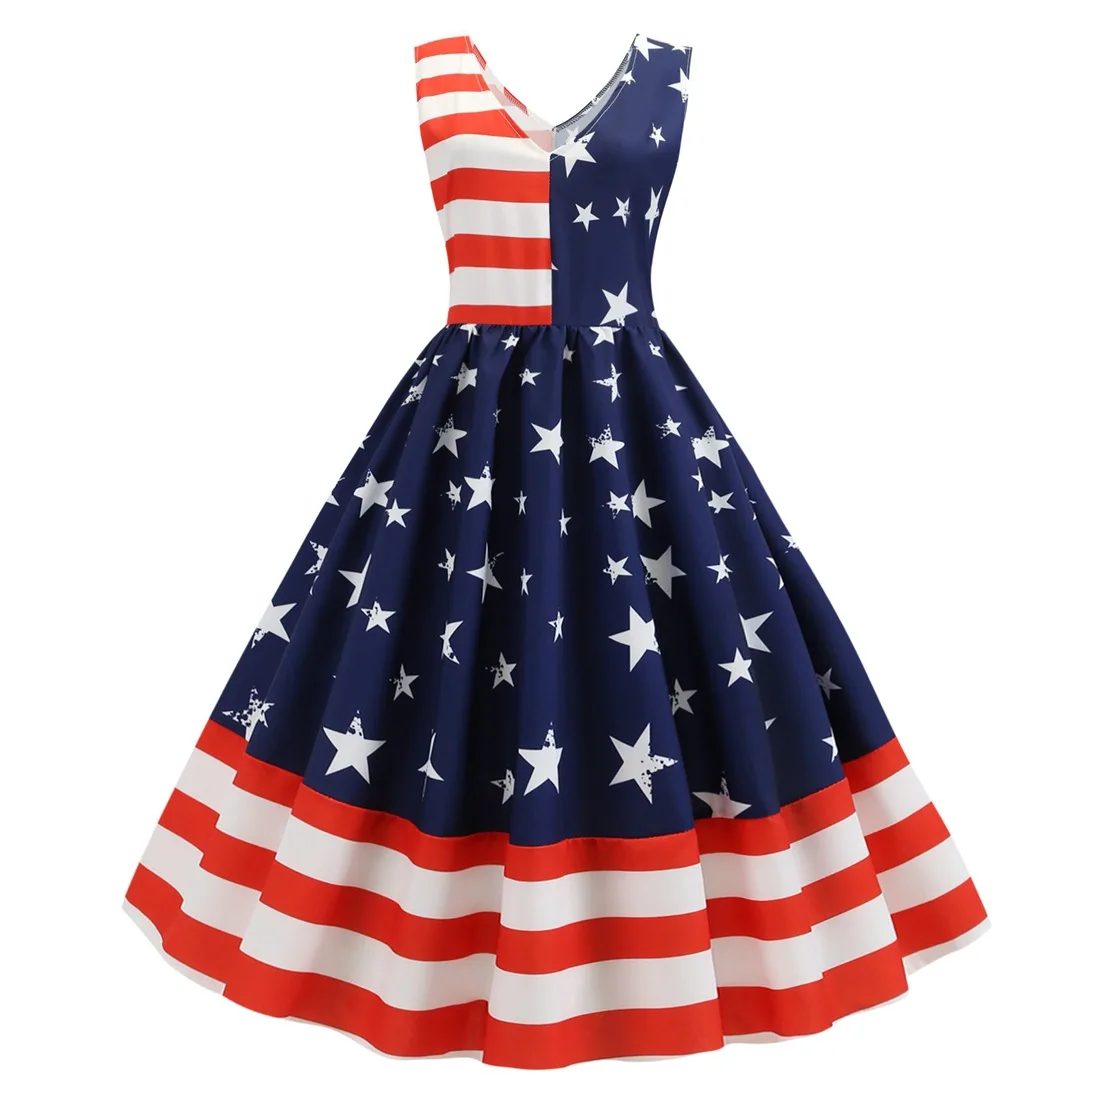 Retro Independence Day women's V-neck sleeveless dress with stripes and stars